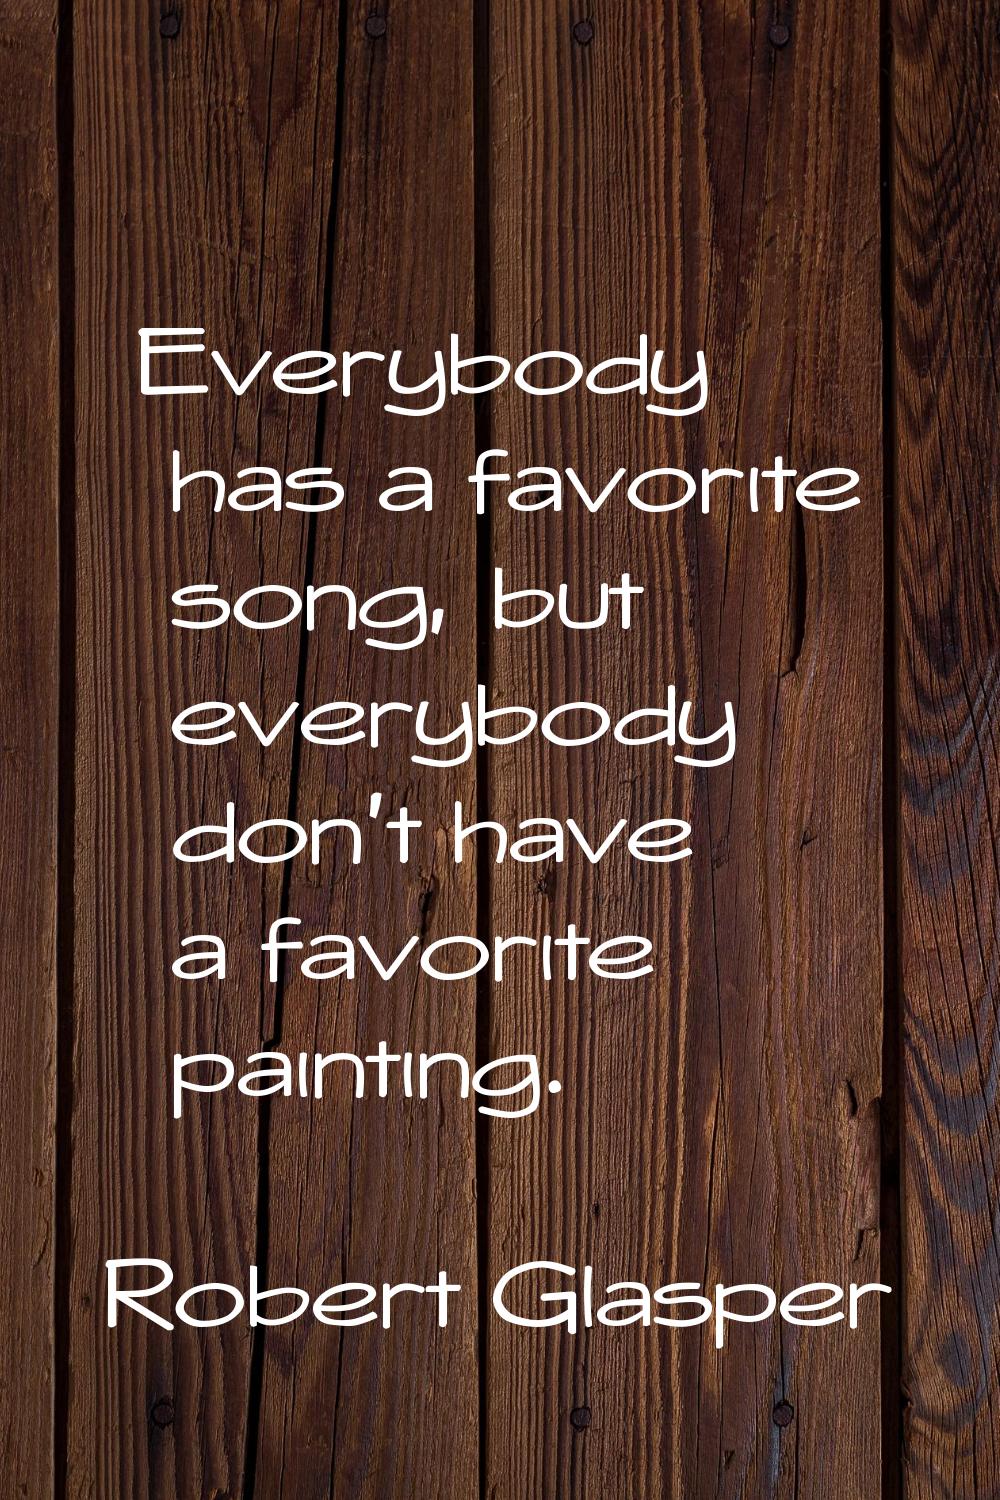 Everybody has a favorite song, but everybody don't have a favorite painting.